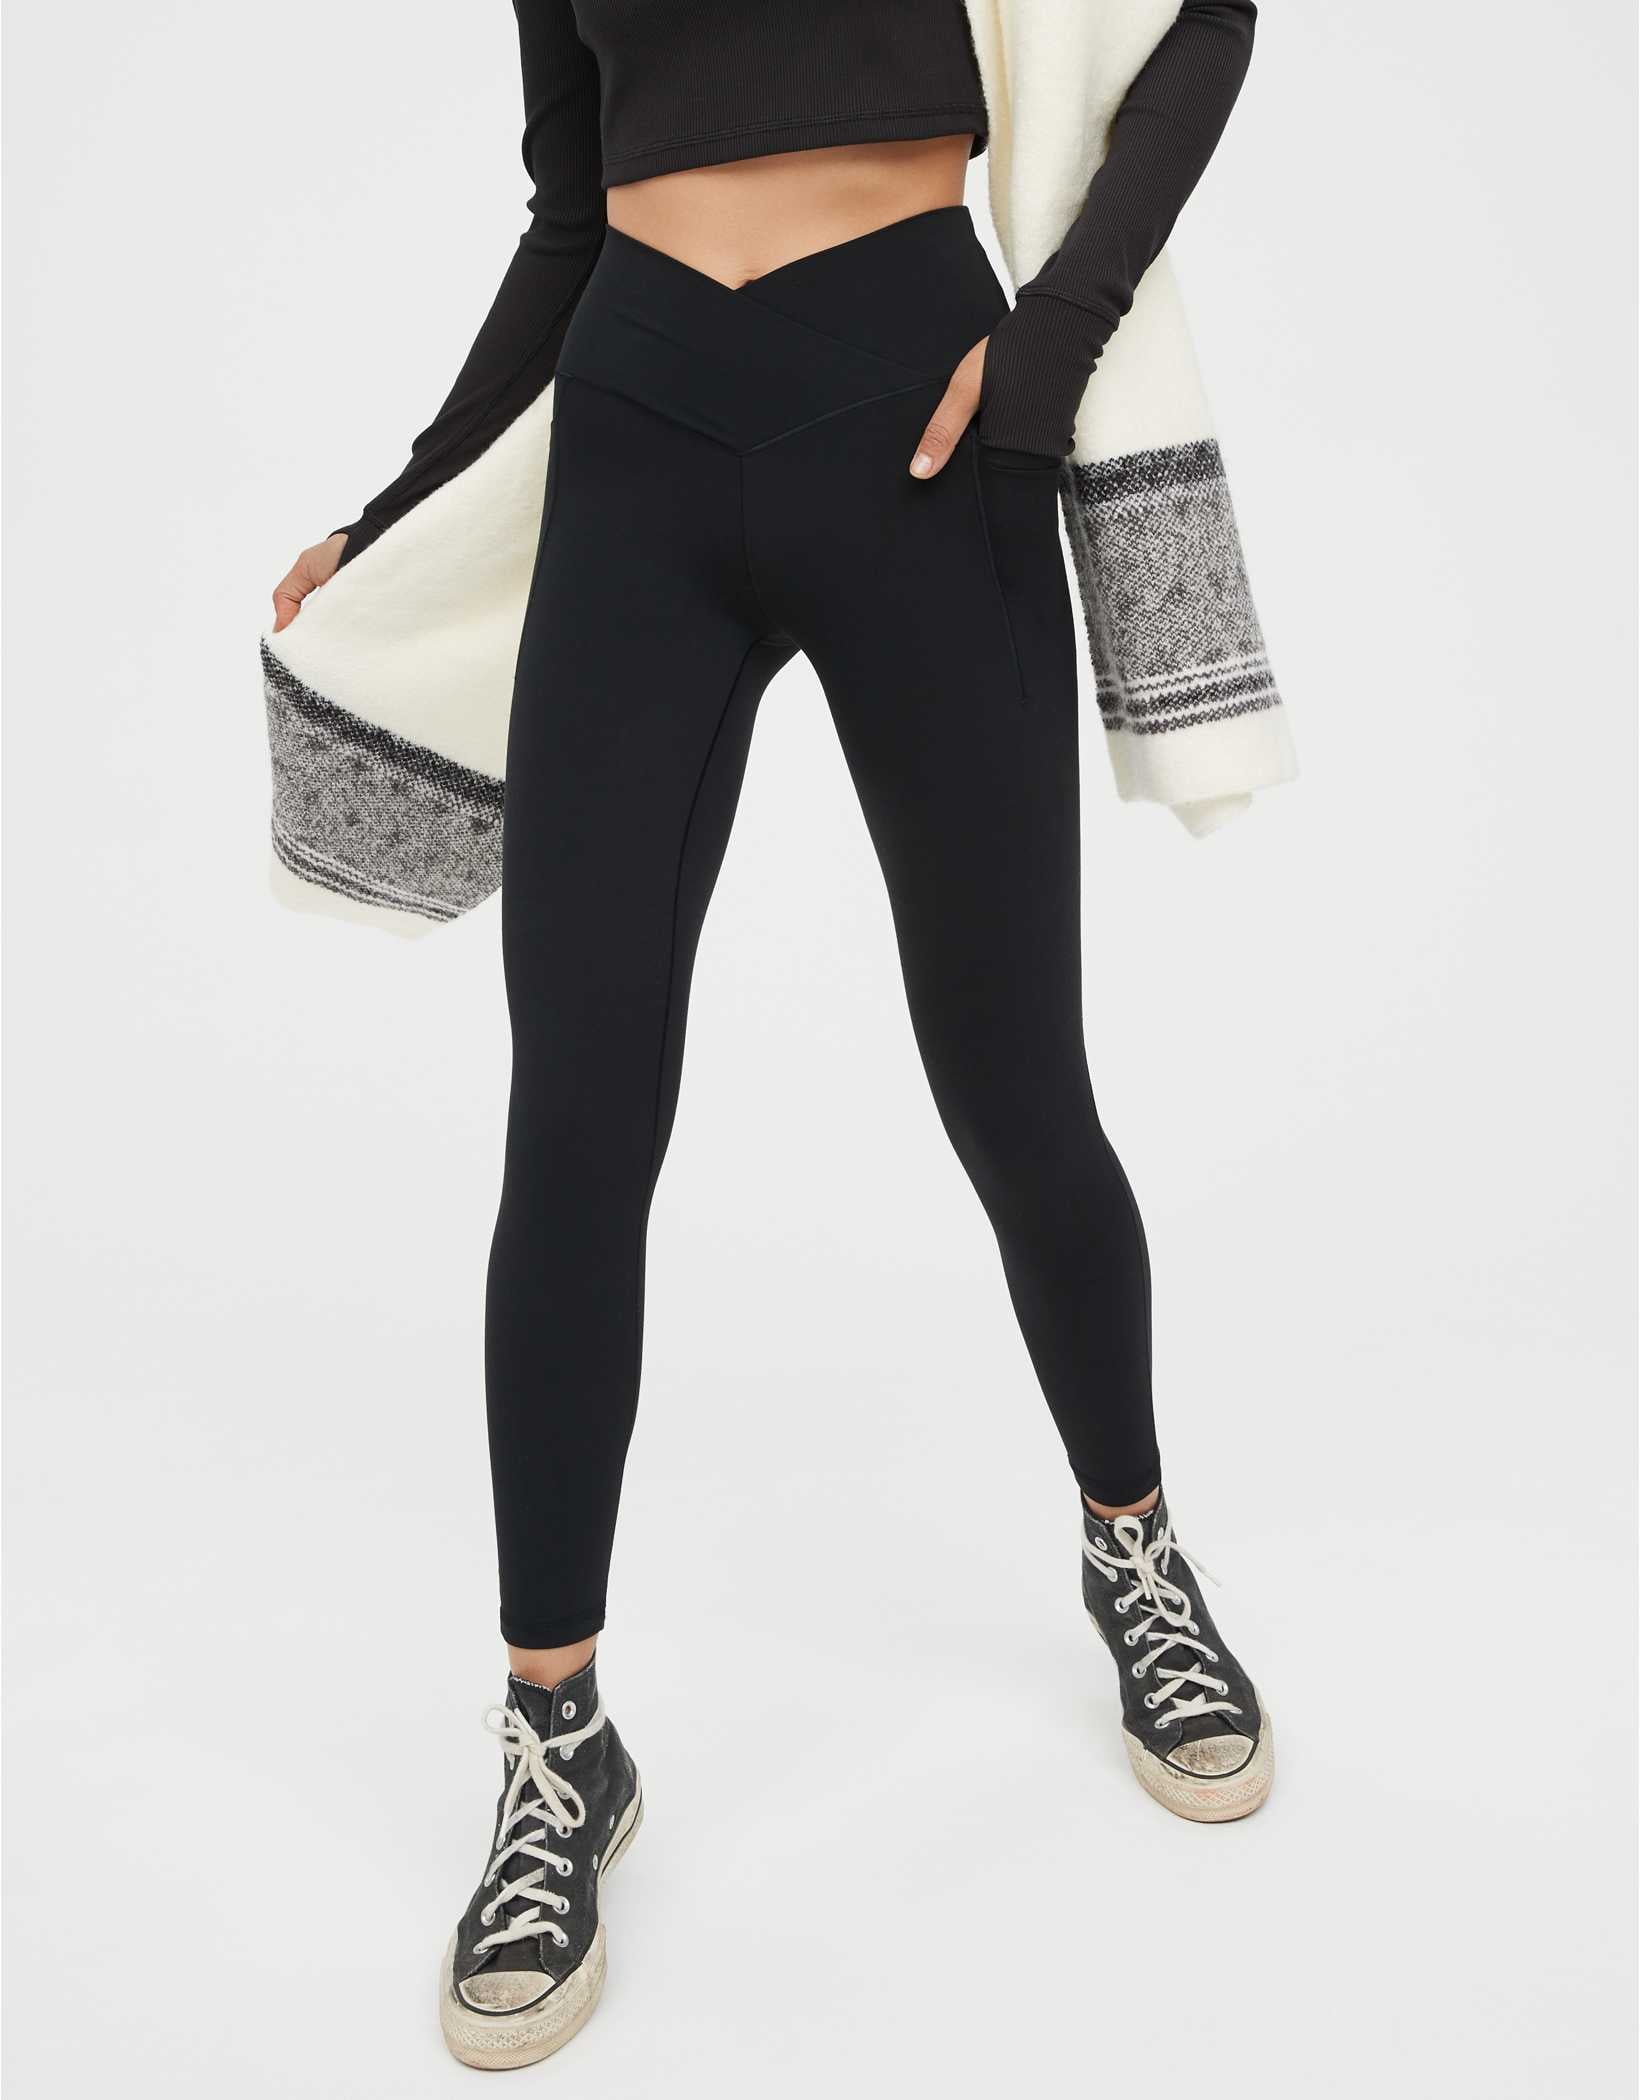 Best Crossover Leggings: Offline By Aerie Real Me Xtra Crossover